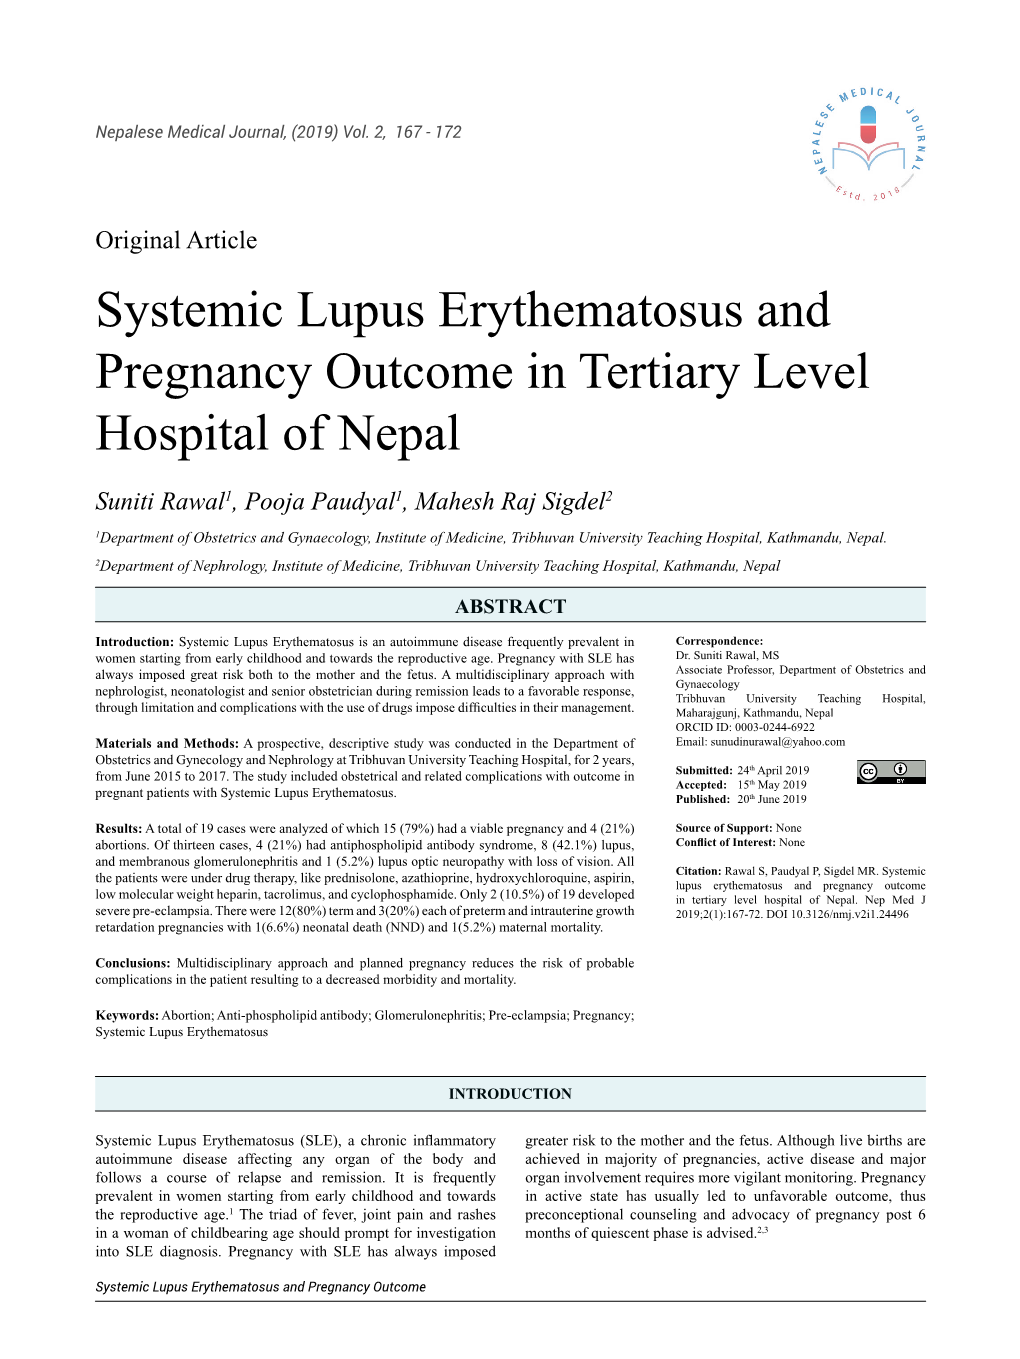 Systemic Lupus Erythematosus and Pregnancy Outcome in Tertiary Level Hospital of Nepal